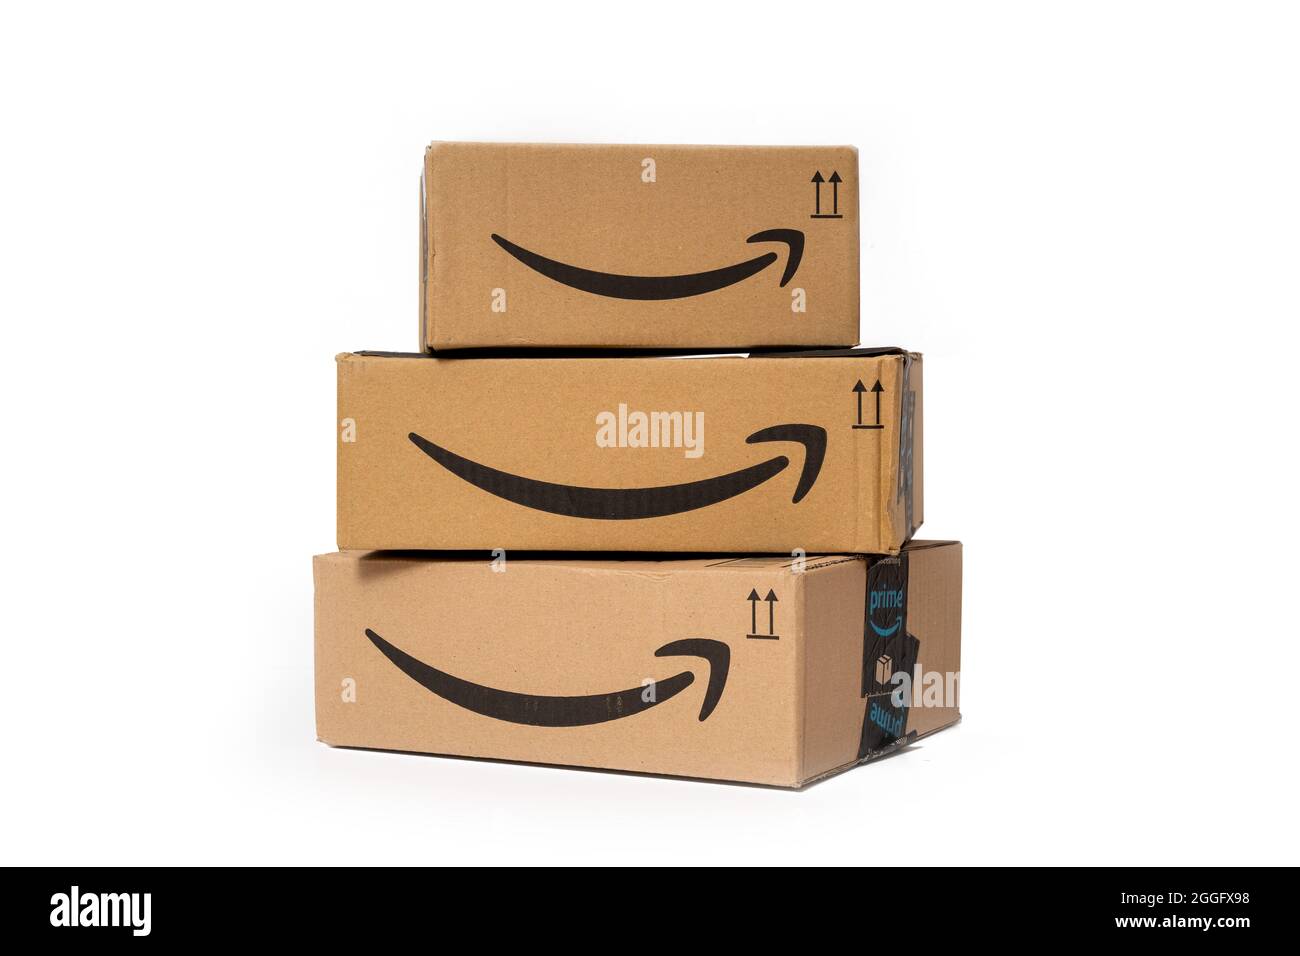 MADRID, SPAIN - AUGUST 31, 2021 : Set of three Amazon Prime packages  stacked on isolated white background Stock Photo - Alamy